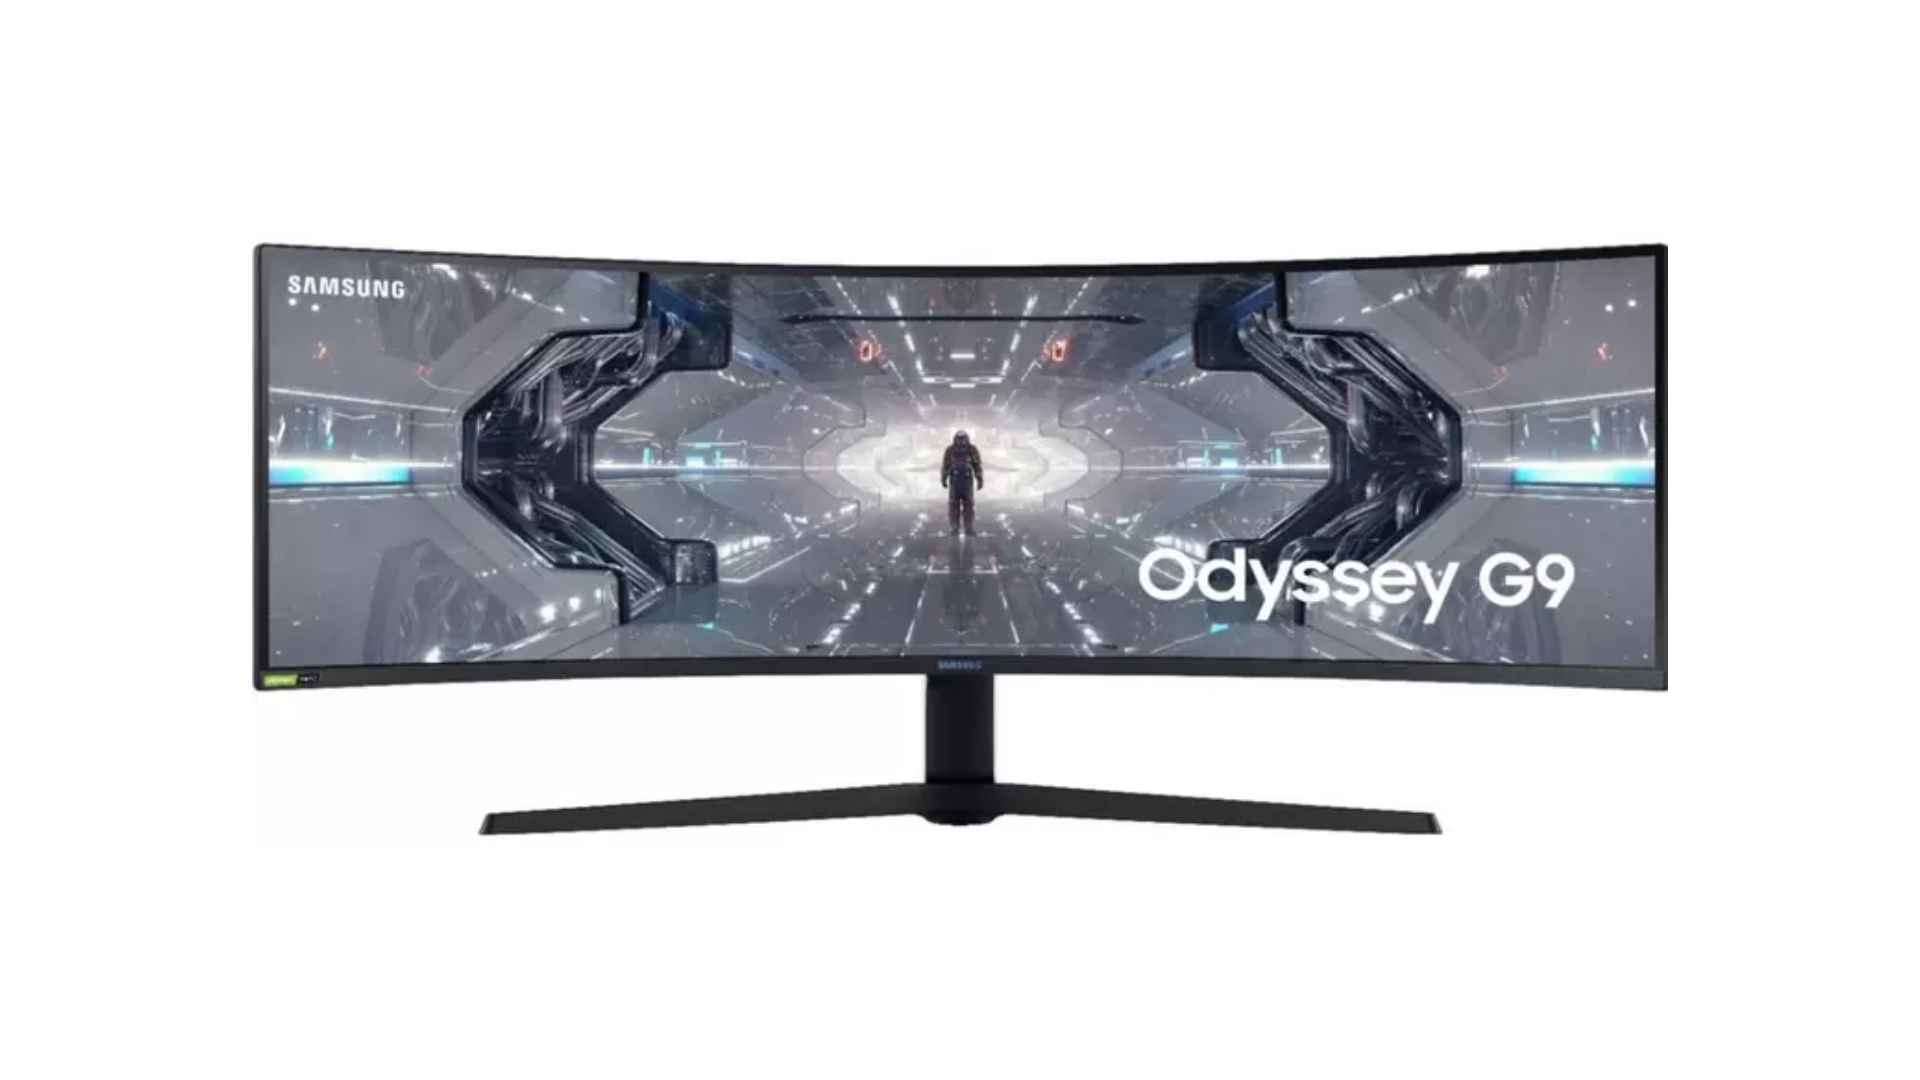 A Samsung Odyssey G9 curved gaming monitor on a white background.